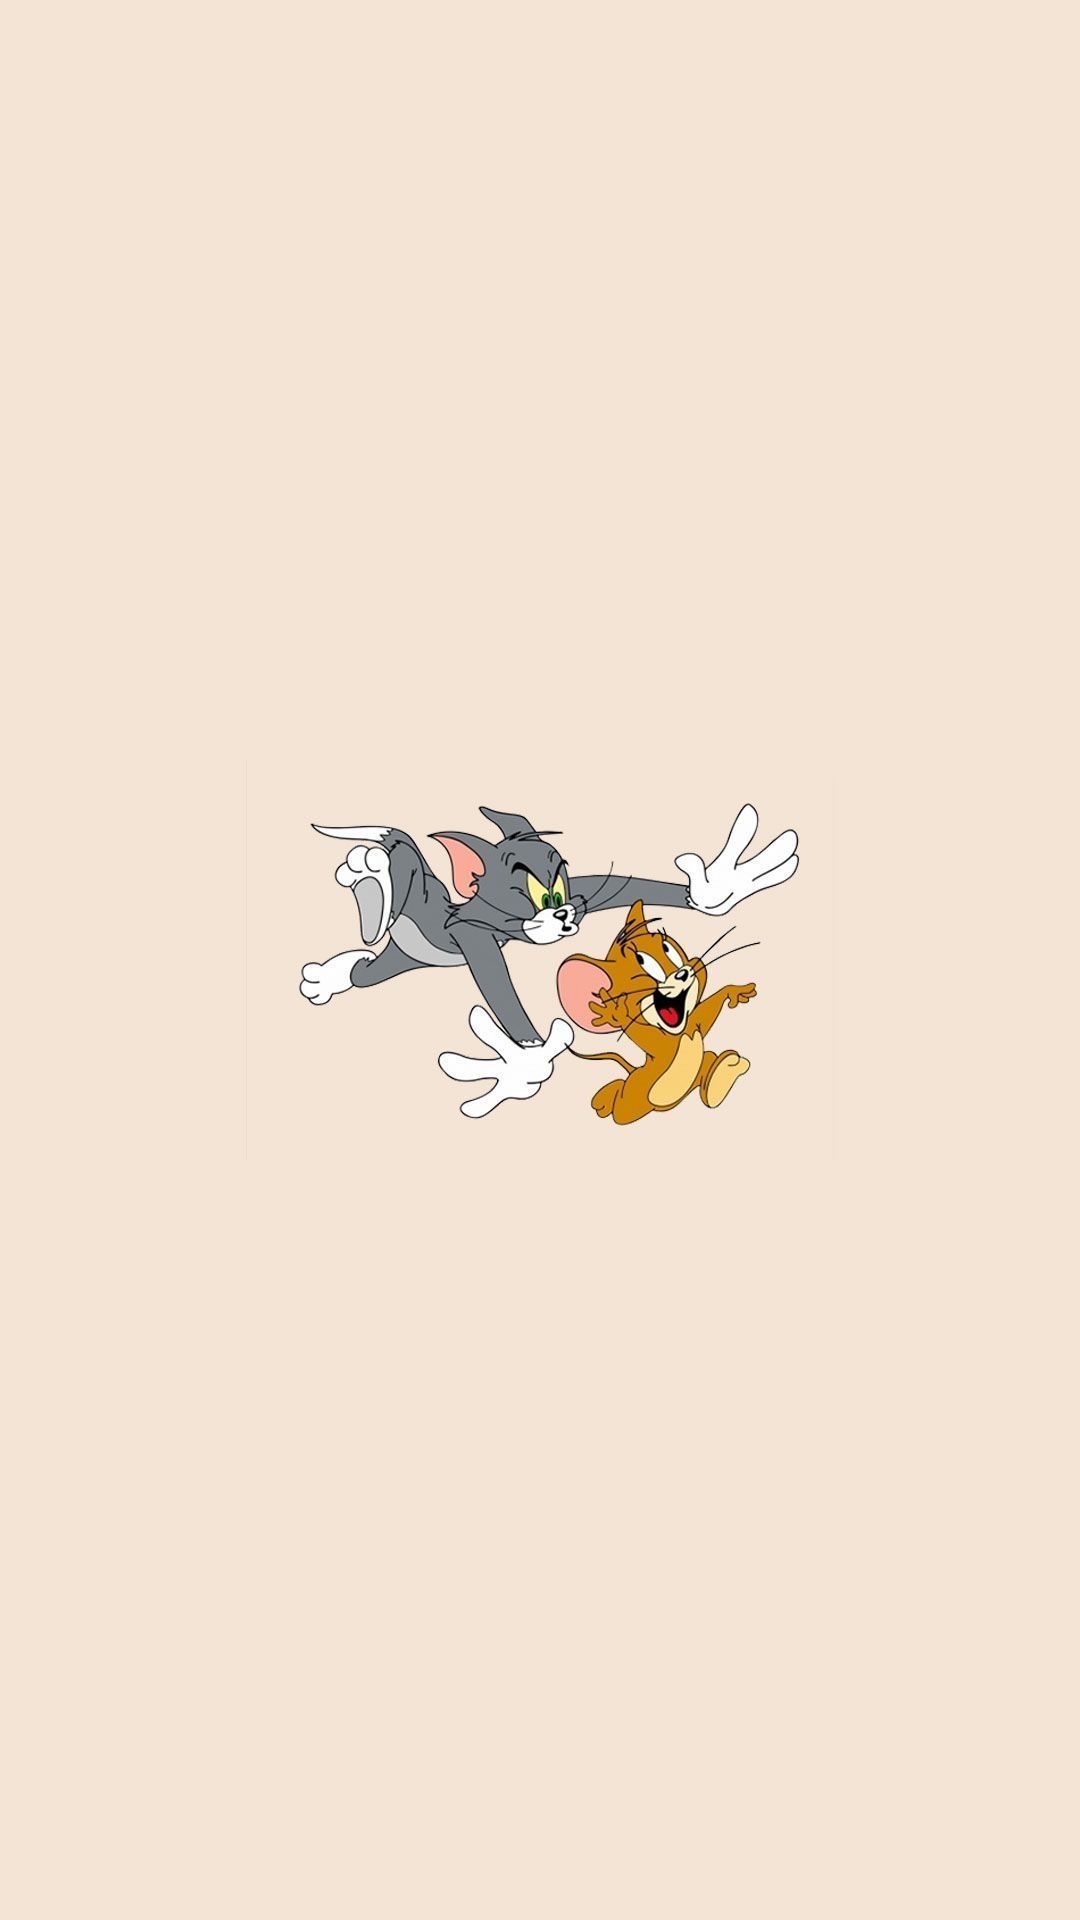 A cartoon of tom and jerry on the ground - Tom and Jerry